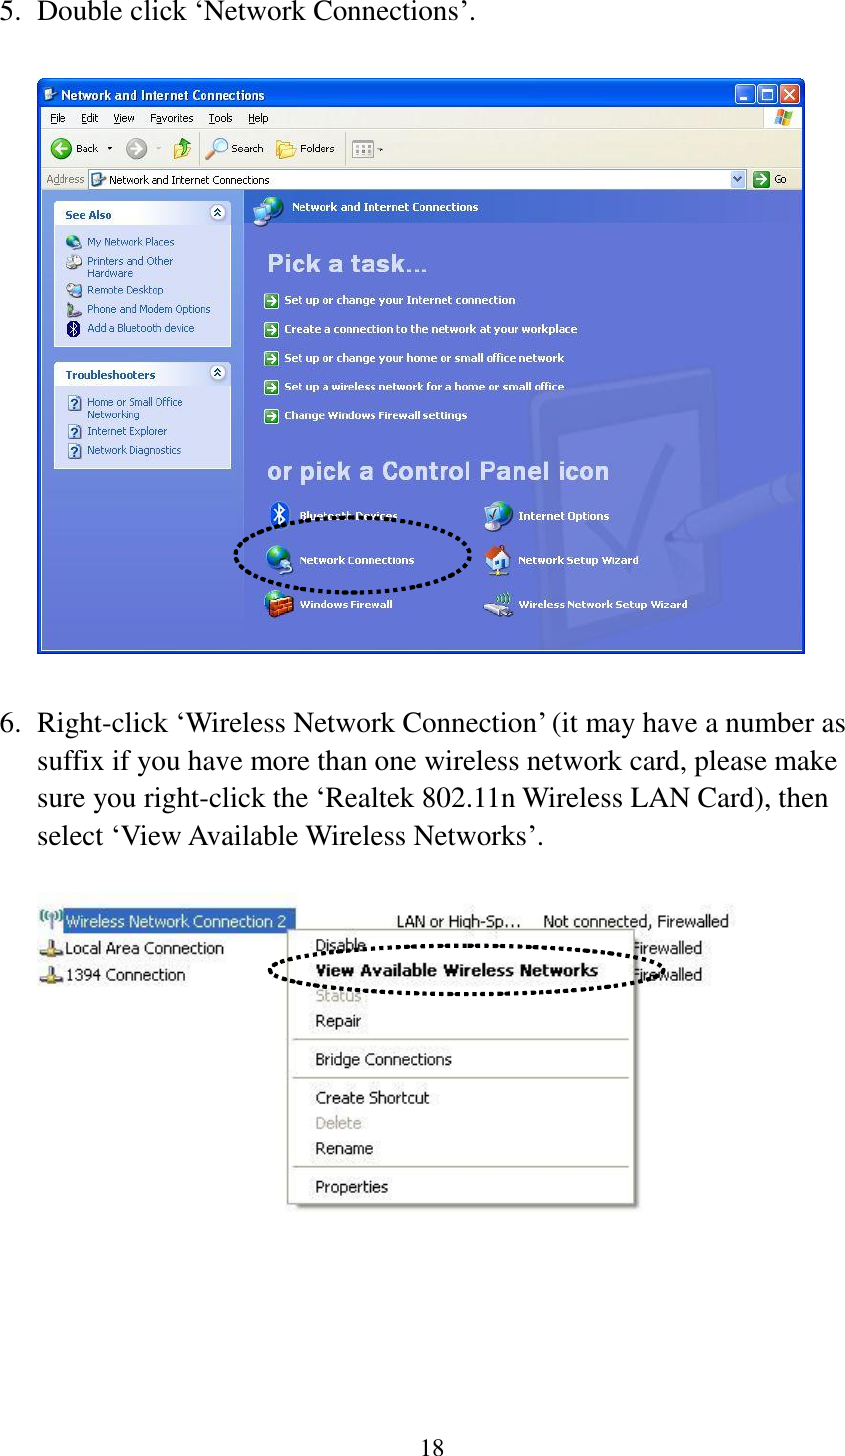 18  5. Double click ‘Network Connections’.    6. Right-click ‘Wireless Network Connection’ (it may have a number as suffix if you have more than one wireless network card, please make sure you right-click the ‘Realtek 802.11n Wireless LAN Card), then select ‘View Available Wireless Networks’.        